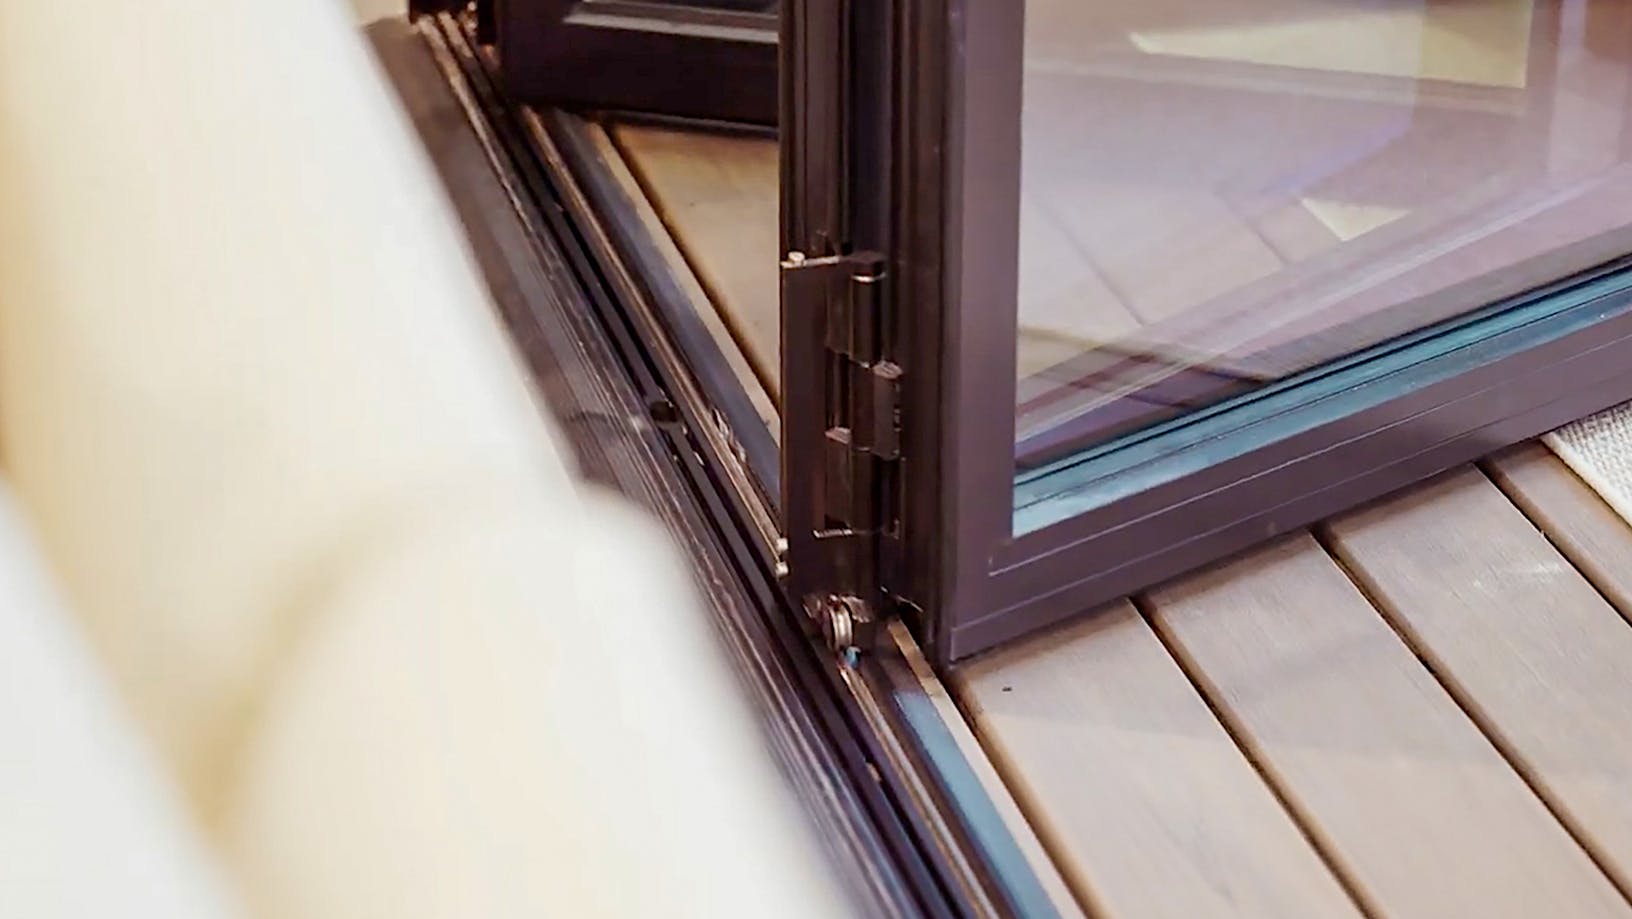 Close-up view of a partially open folding glass door with a black frame and floor track, placed above light-colored wooden flooring